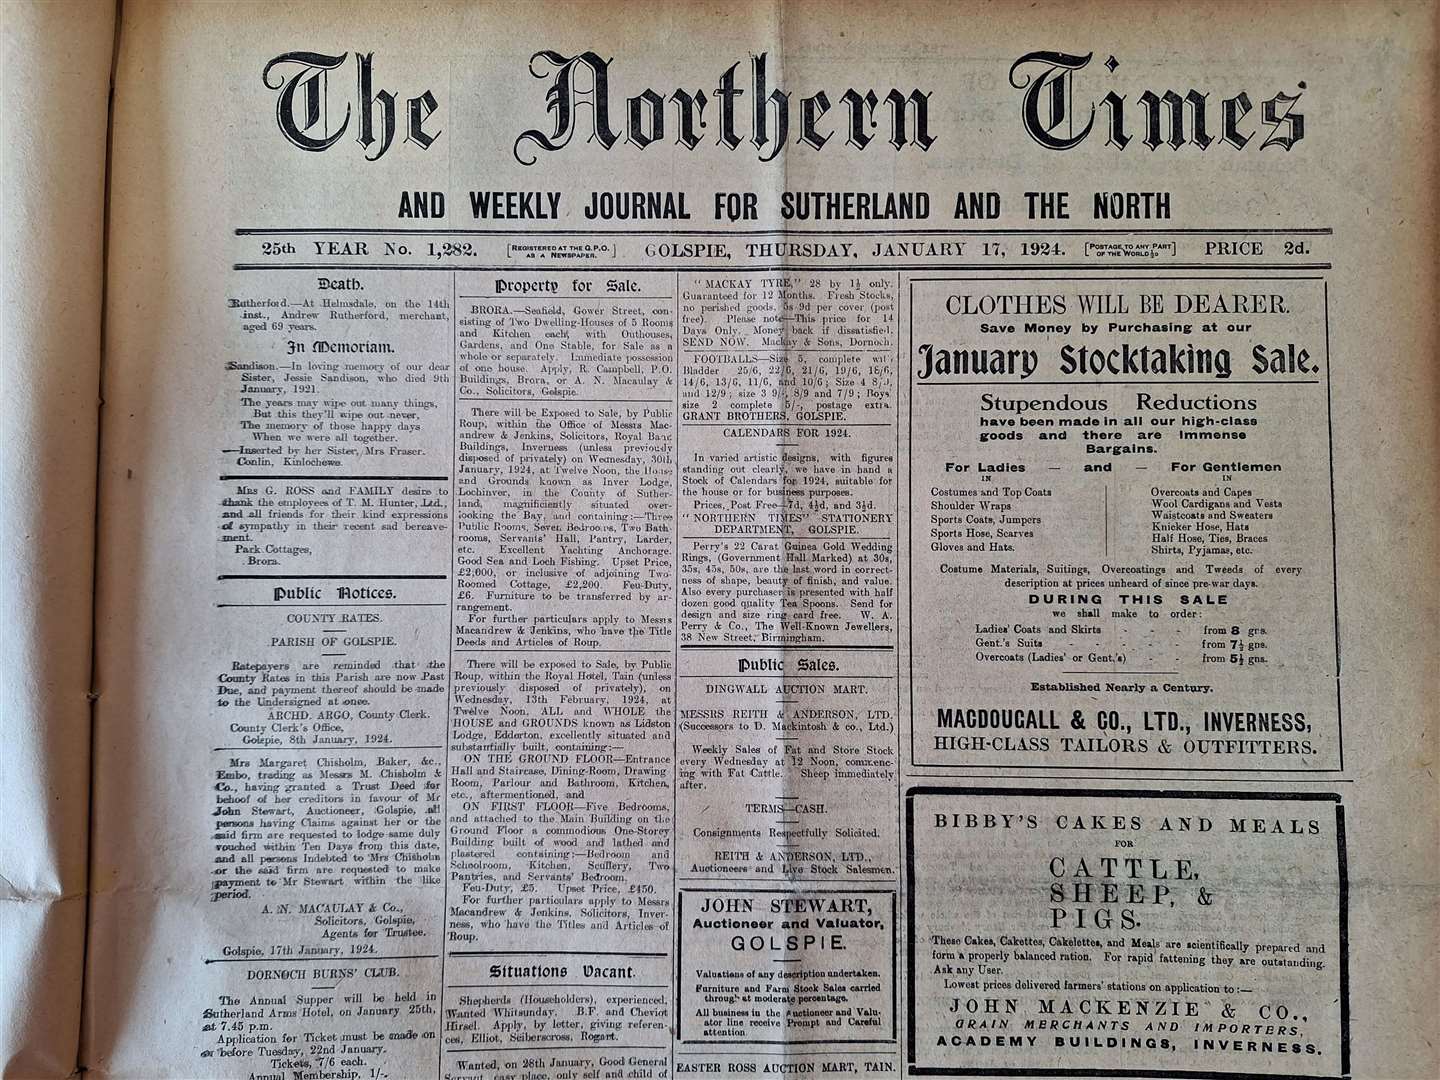 The edition of January 17, 1924.